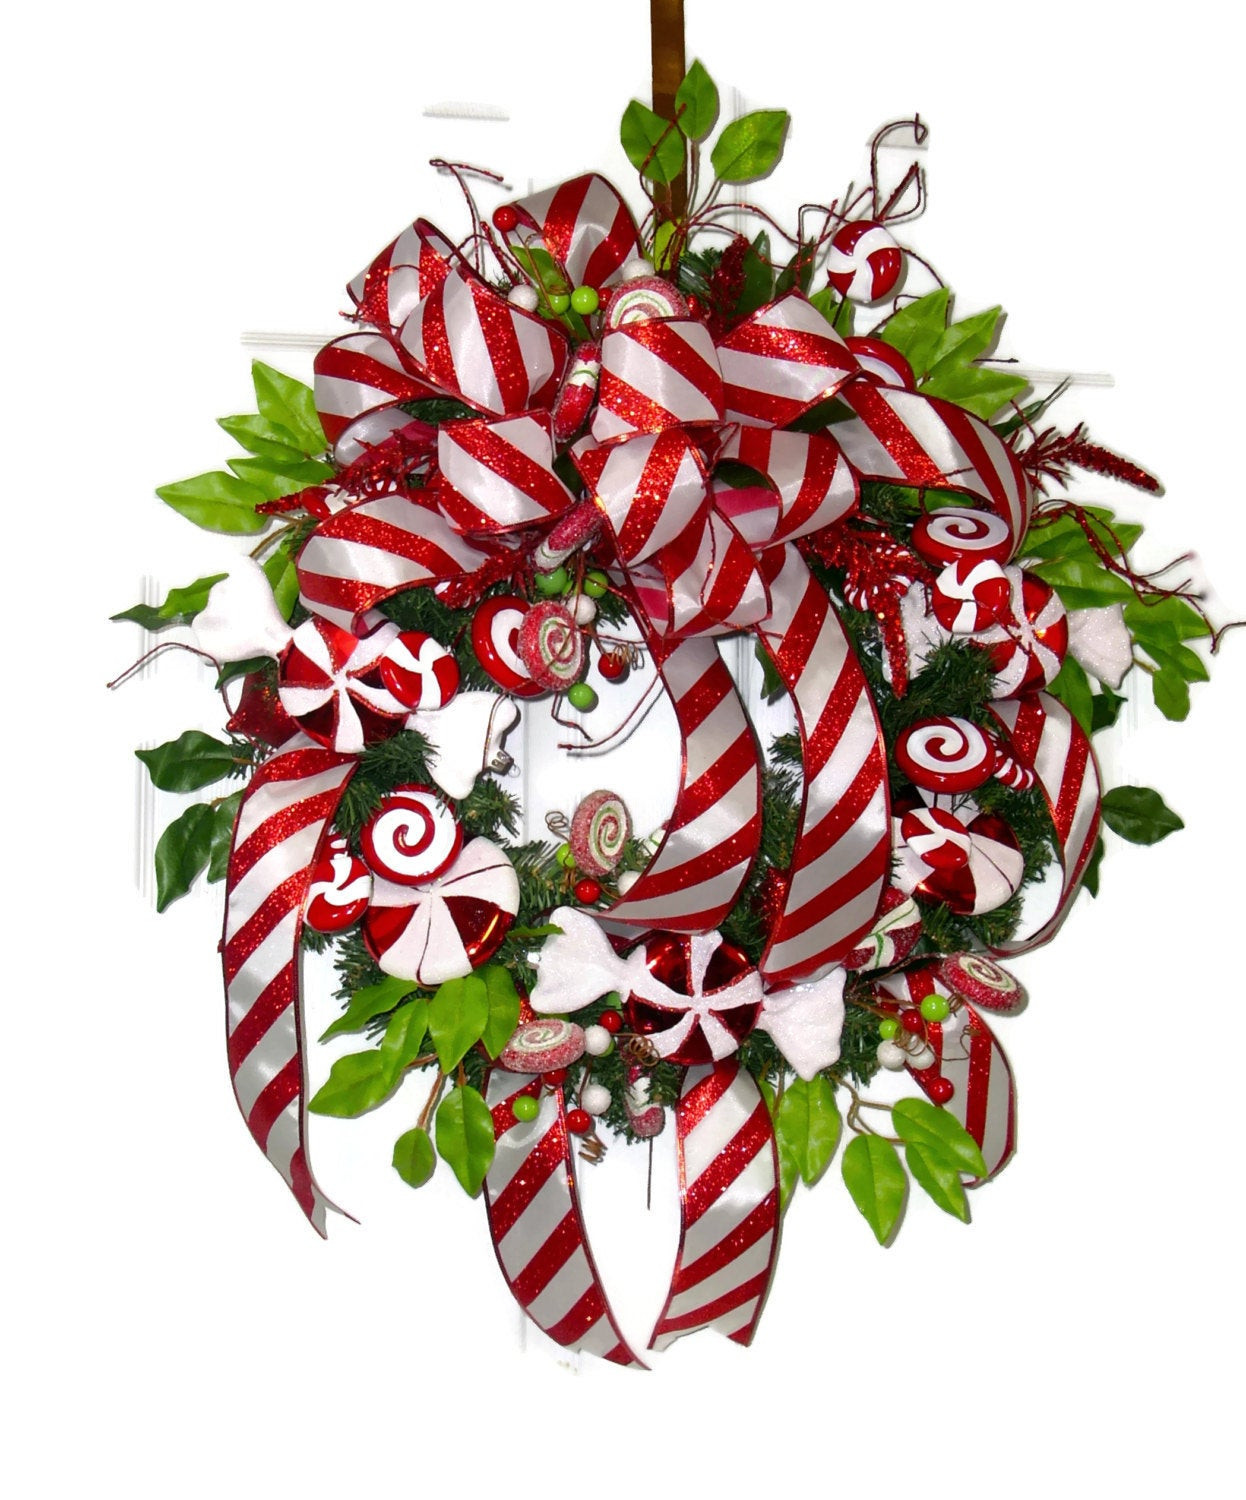 Candy Cane Christmas Wreath
 Candy Cane Christmas Wreath Red and White Christmas Wreath